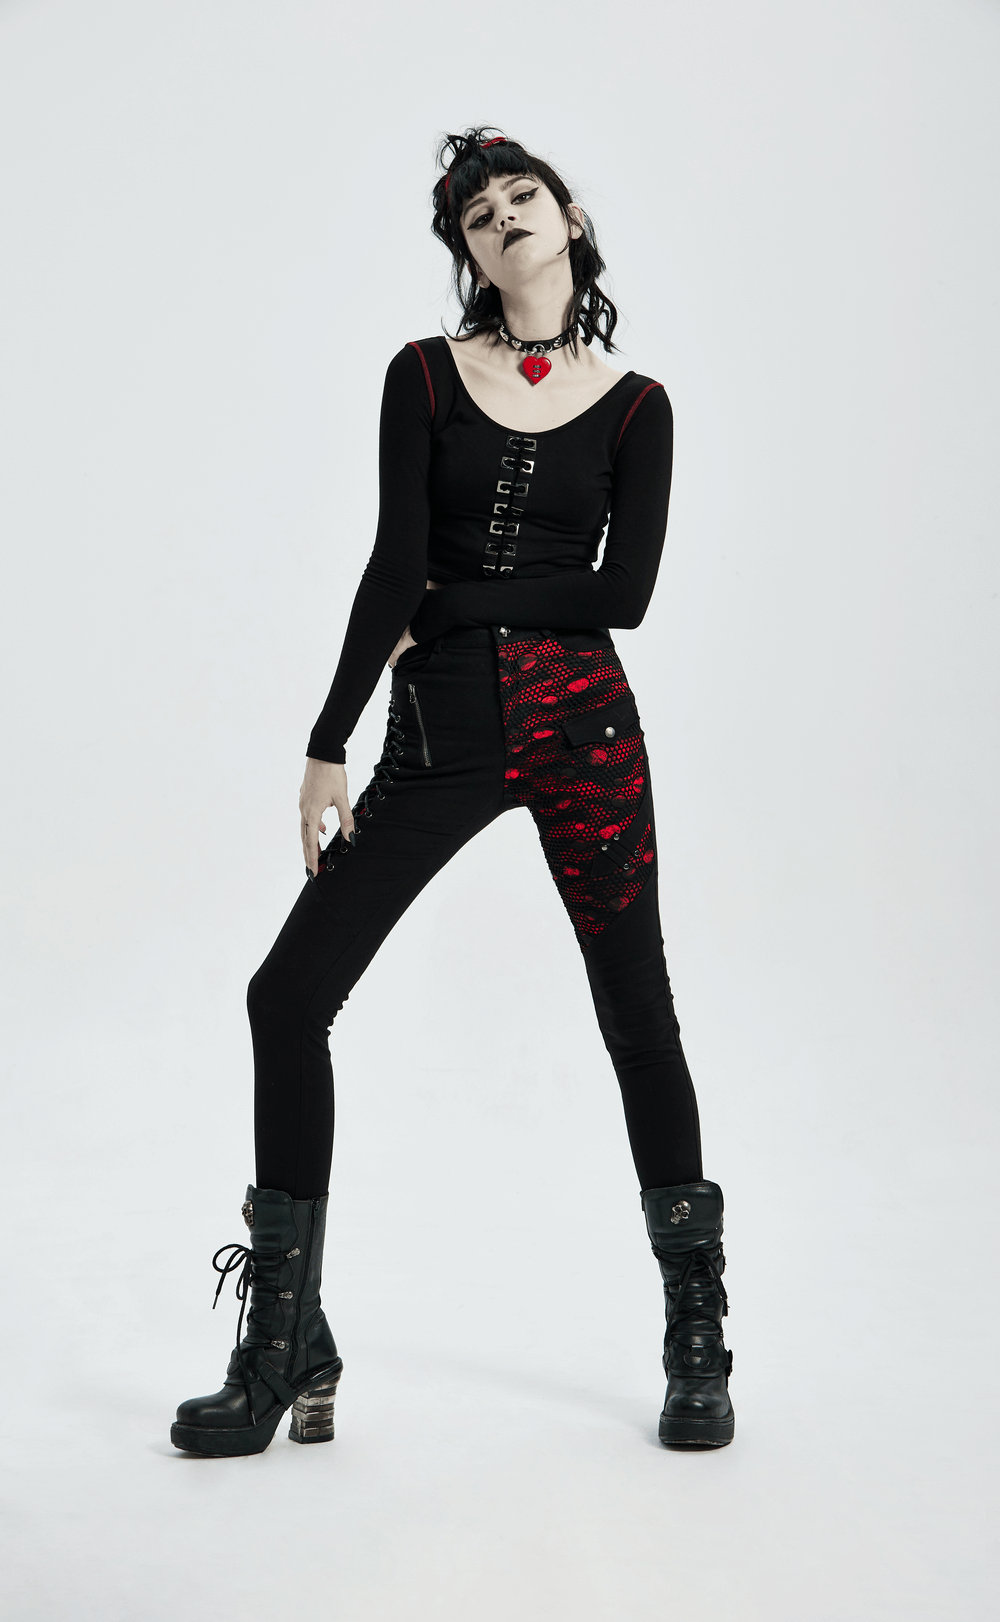 Stylish Black Gothic Trousers with Red Lace-Up Sides